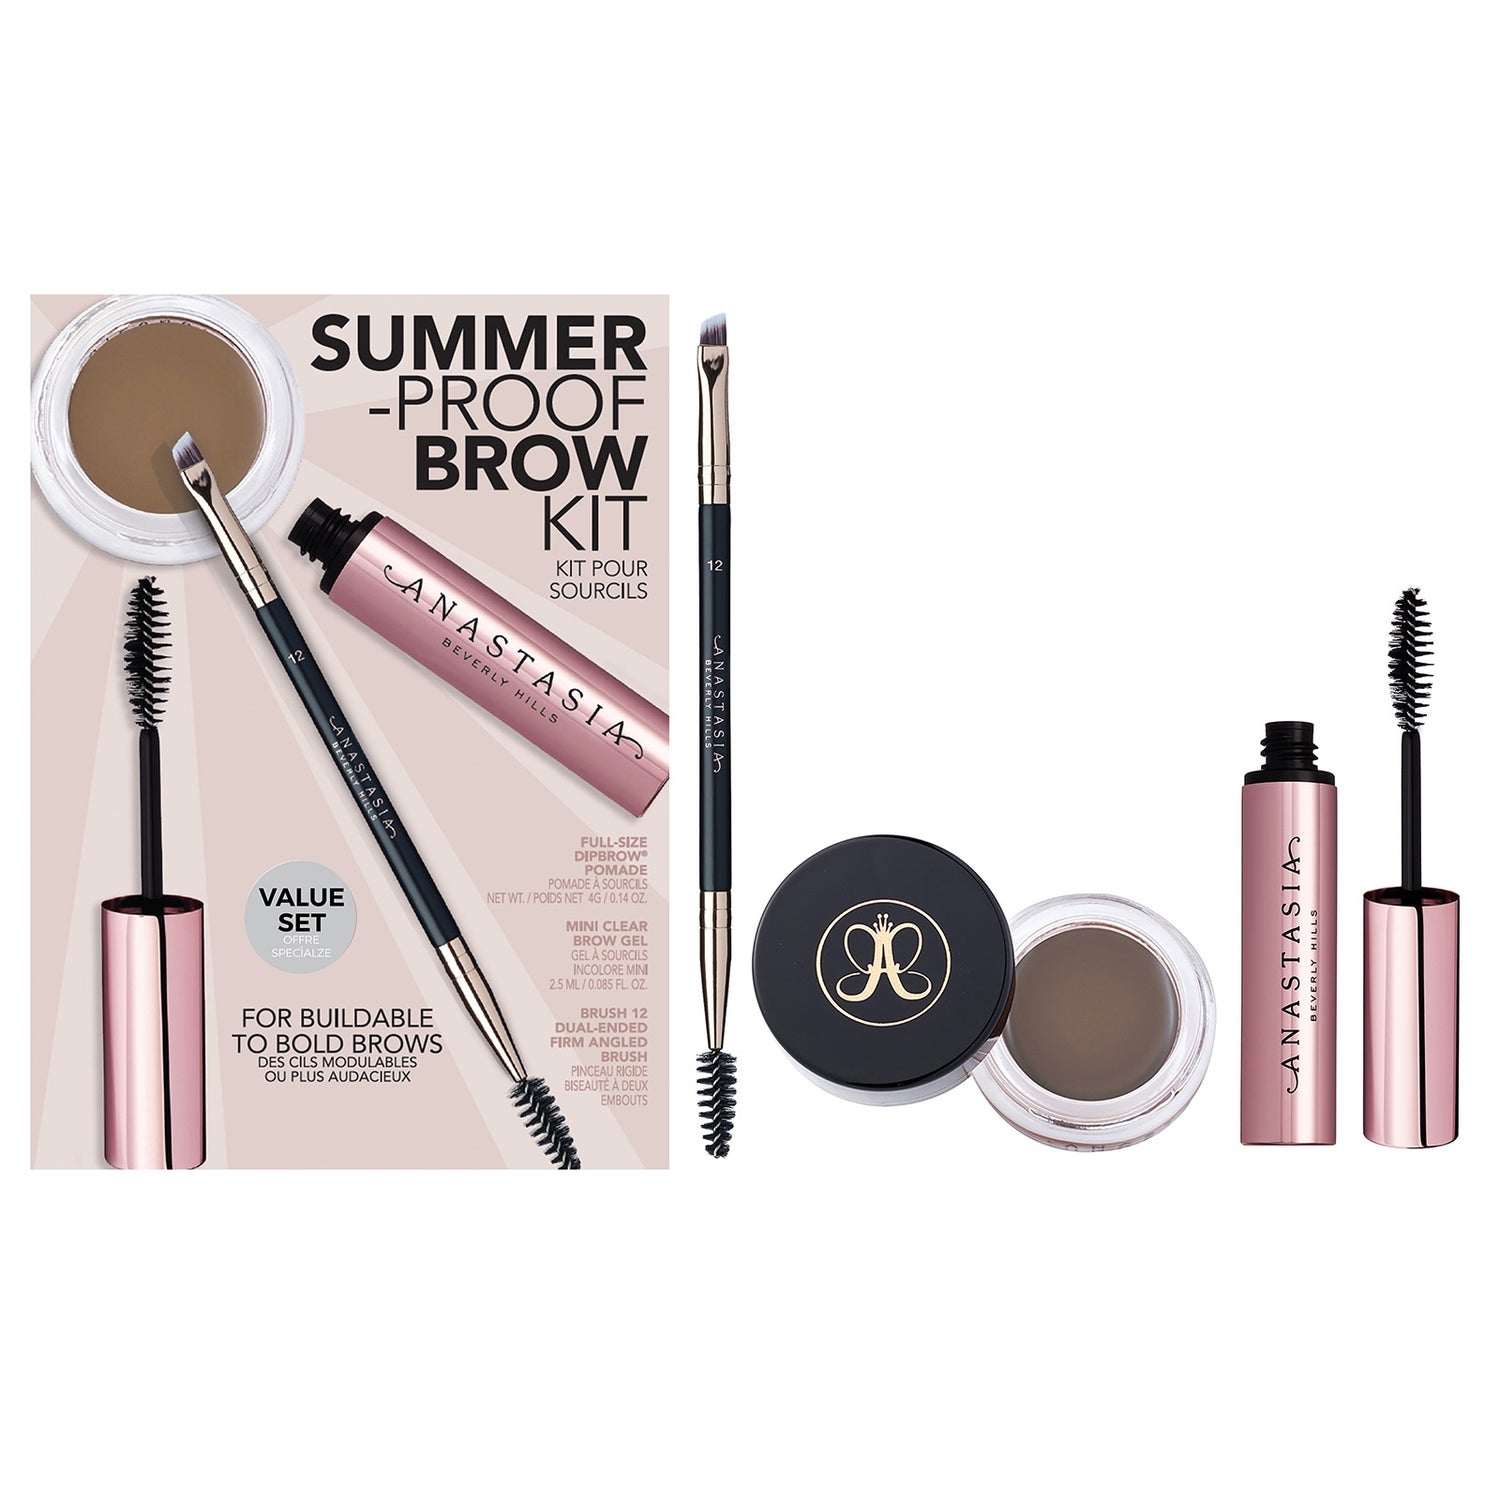 Summer-Proof Brow Kit (£49 Value)